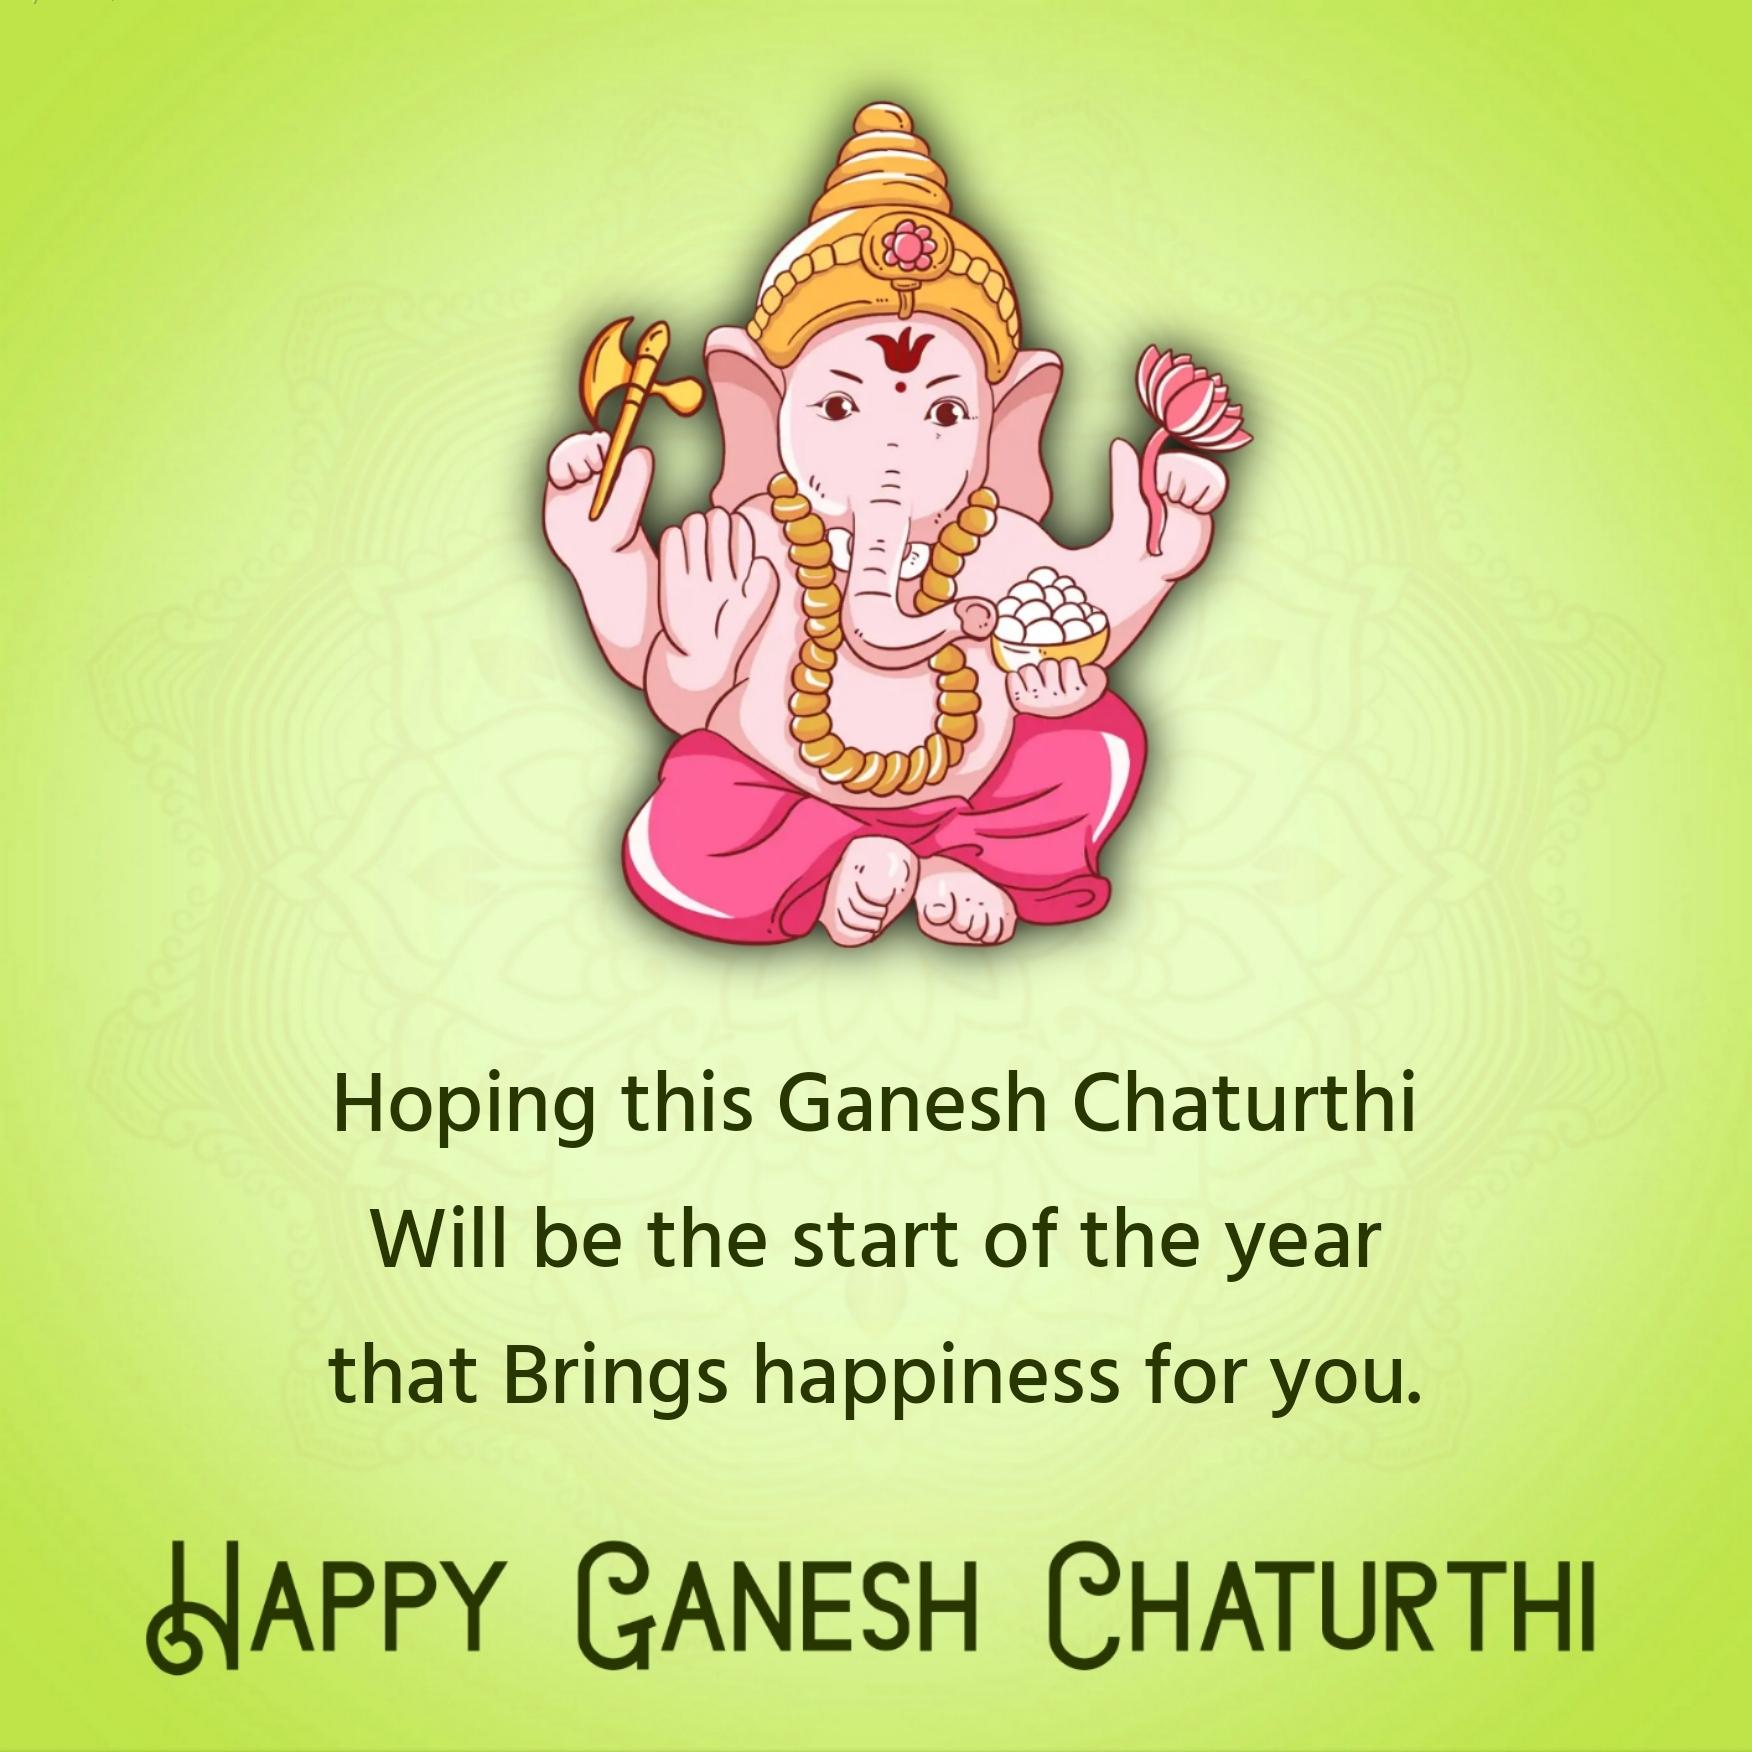 Hoping this Ganesh Chaturthi Will be the start of the year